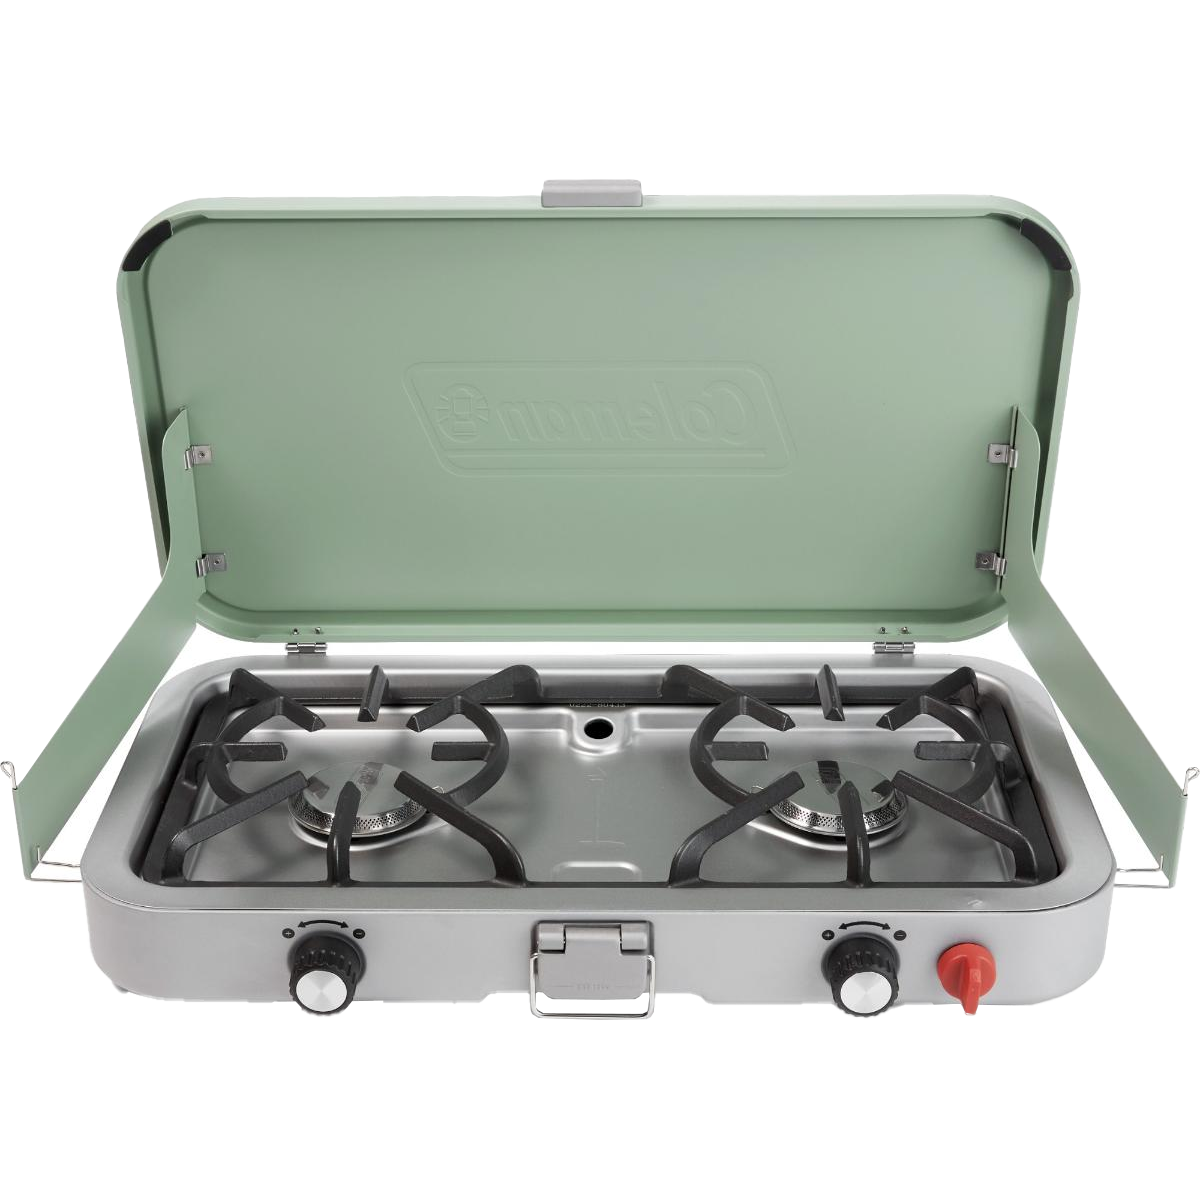 Portable 24,000 BTU Propane Gas Stove-Top Double Burner Fryer Outdoor  Camping